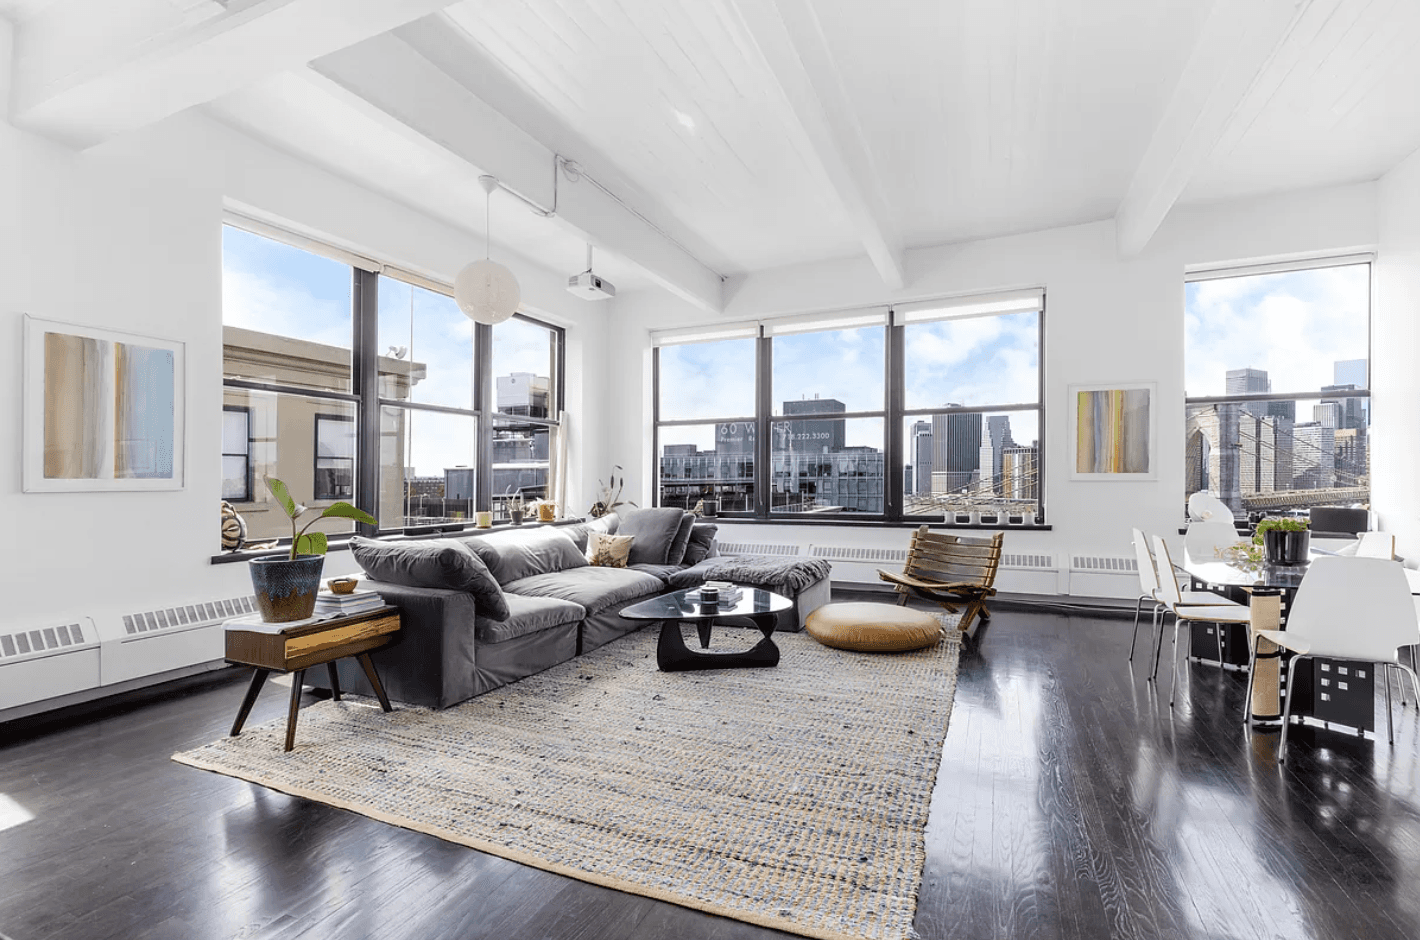 Dumbo Brooklyn Waterfront Loft with over 2000 Sq Feet